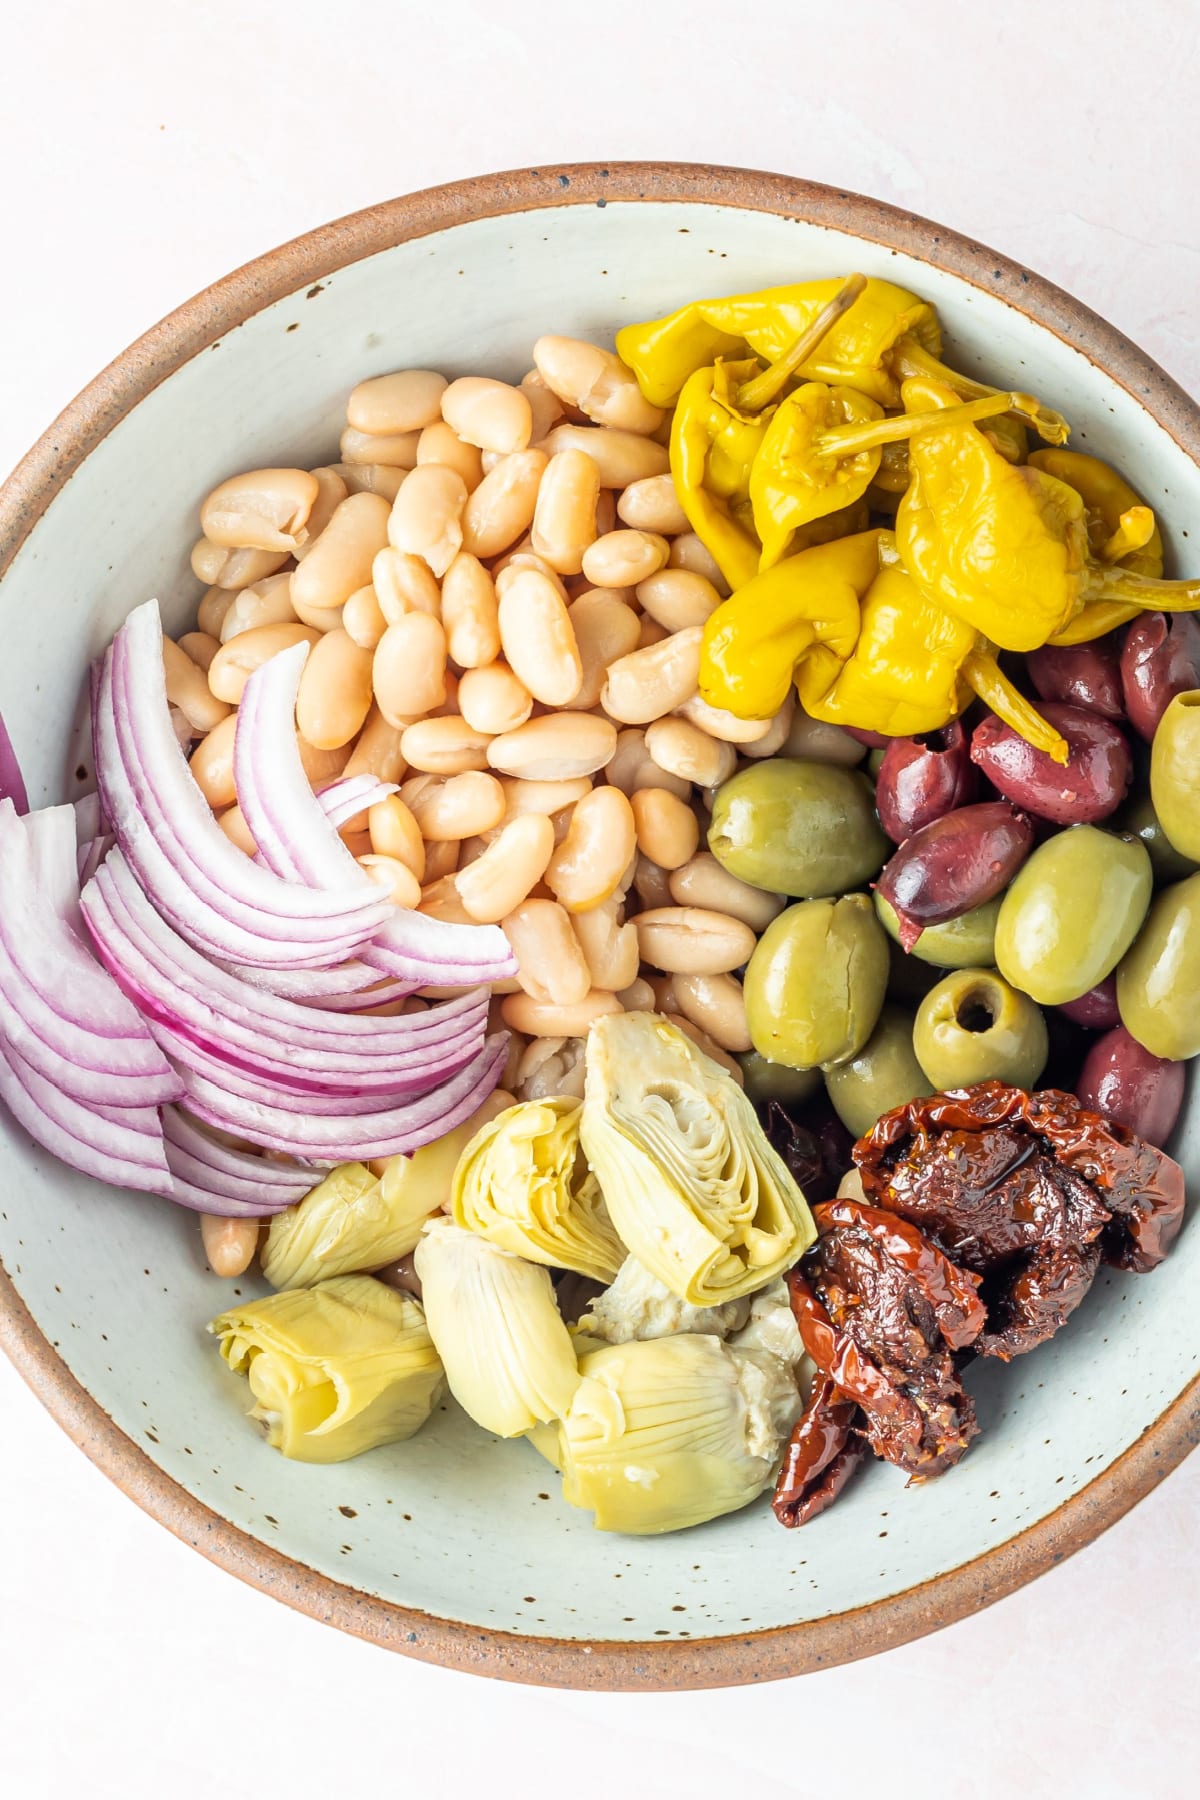 Overhead view of a bowl of white bean antipasto salad before mixing, which includes black kalamata and green castelvetrano olives, white beans, sun dried tomatoes, sliced artichoke hearts, sliced red onion, pepperoncini peppers, herbs and spices.